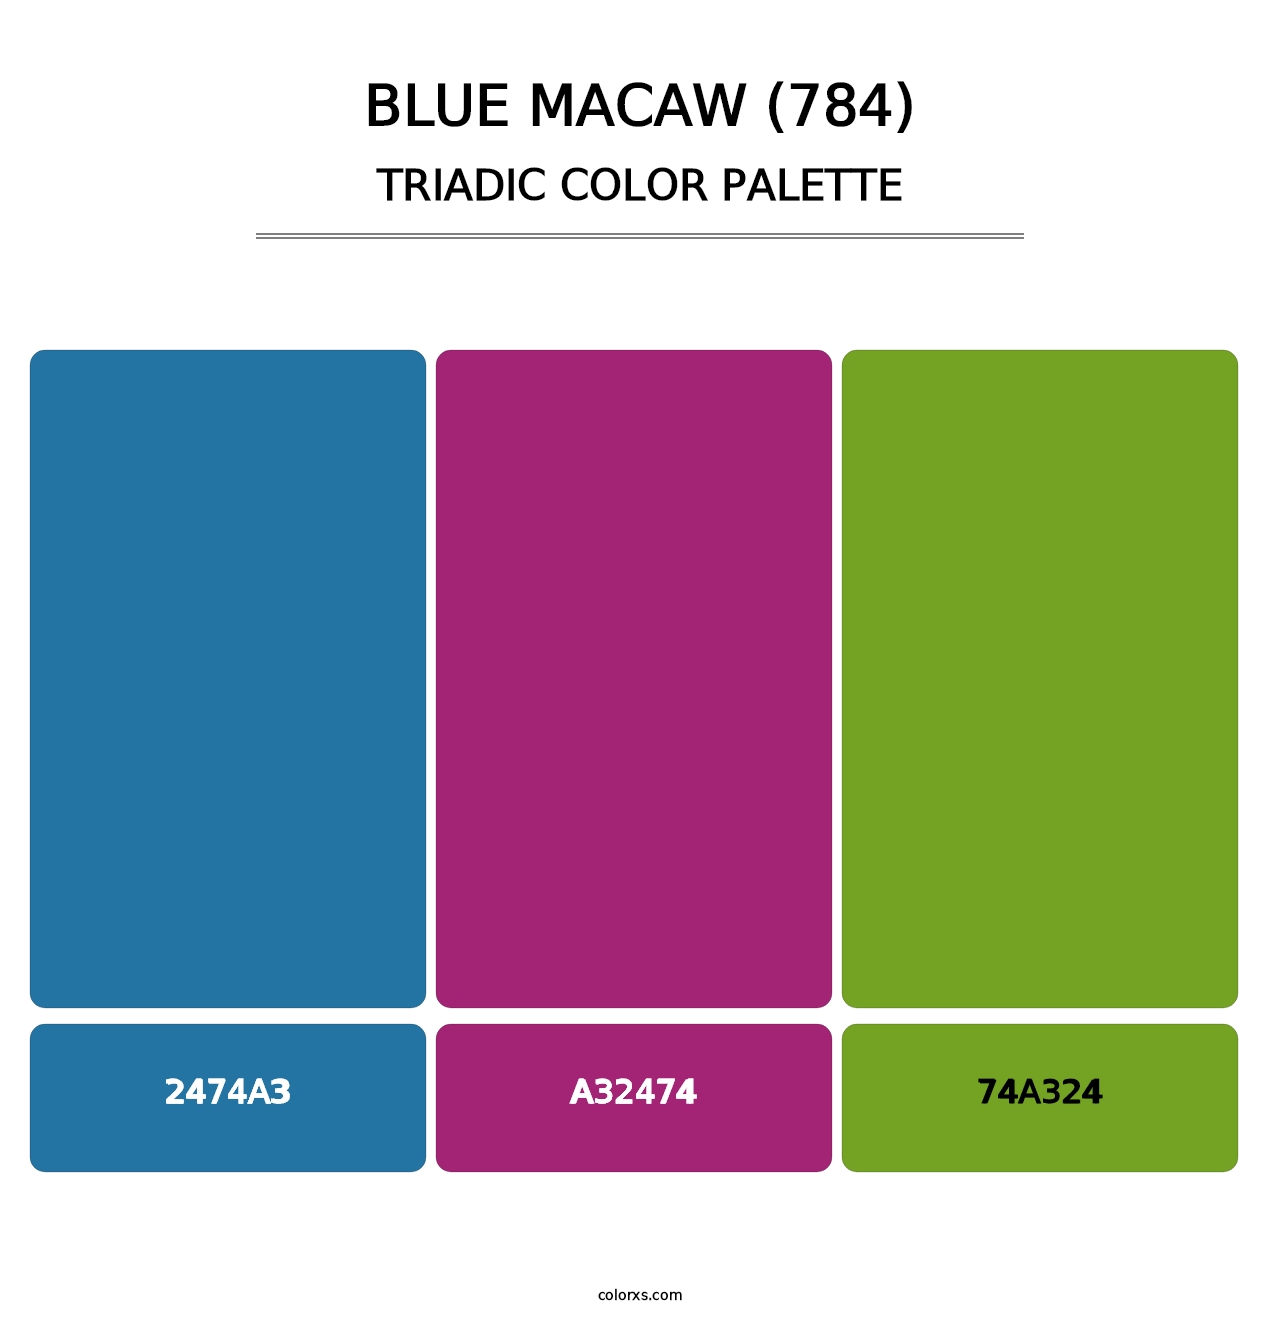 Blue Macaw (784) - Triadic Color Palette